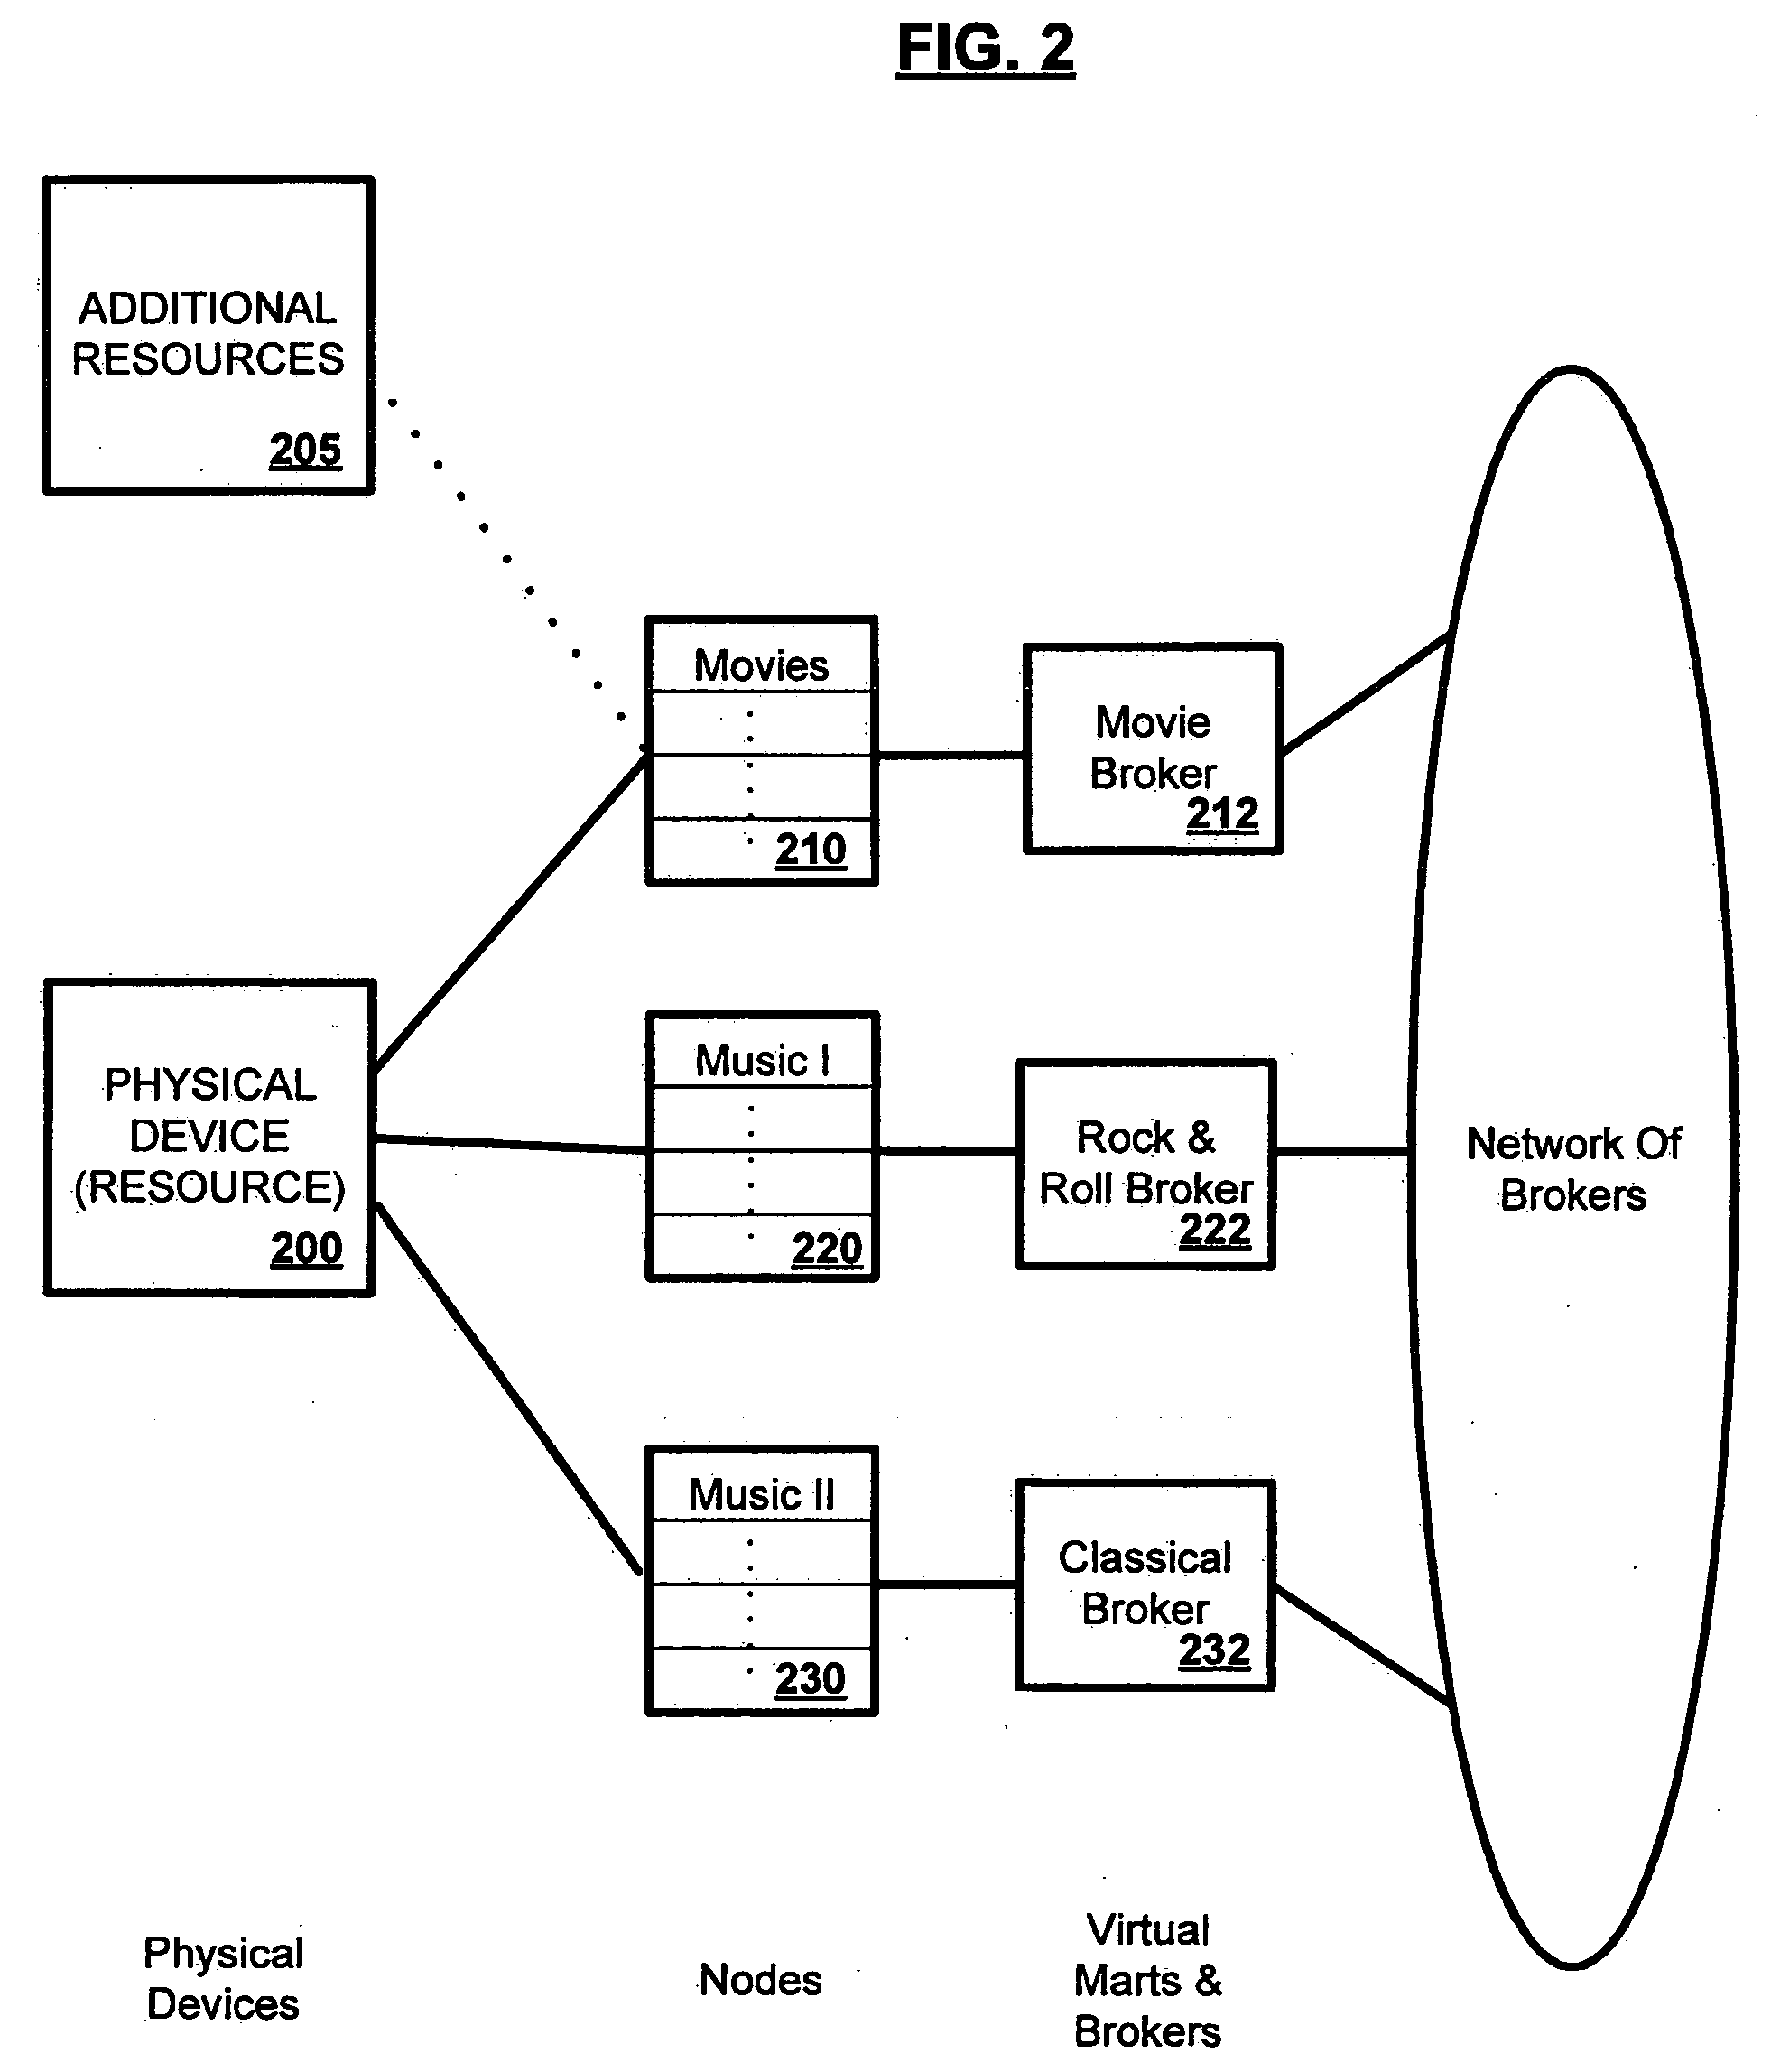 System and apparatus for digital rights management of content and accessibility at various locations and devices